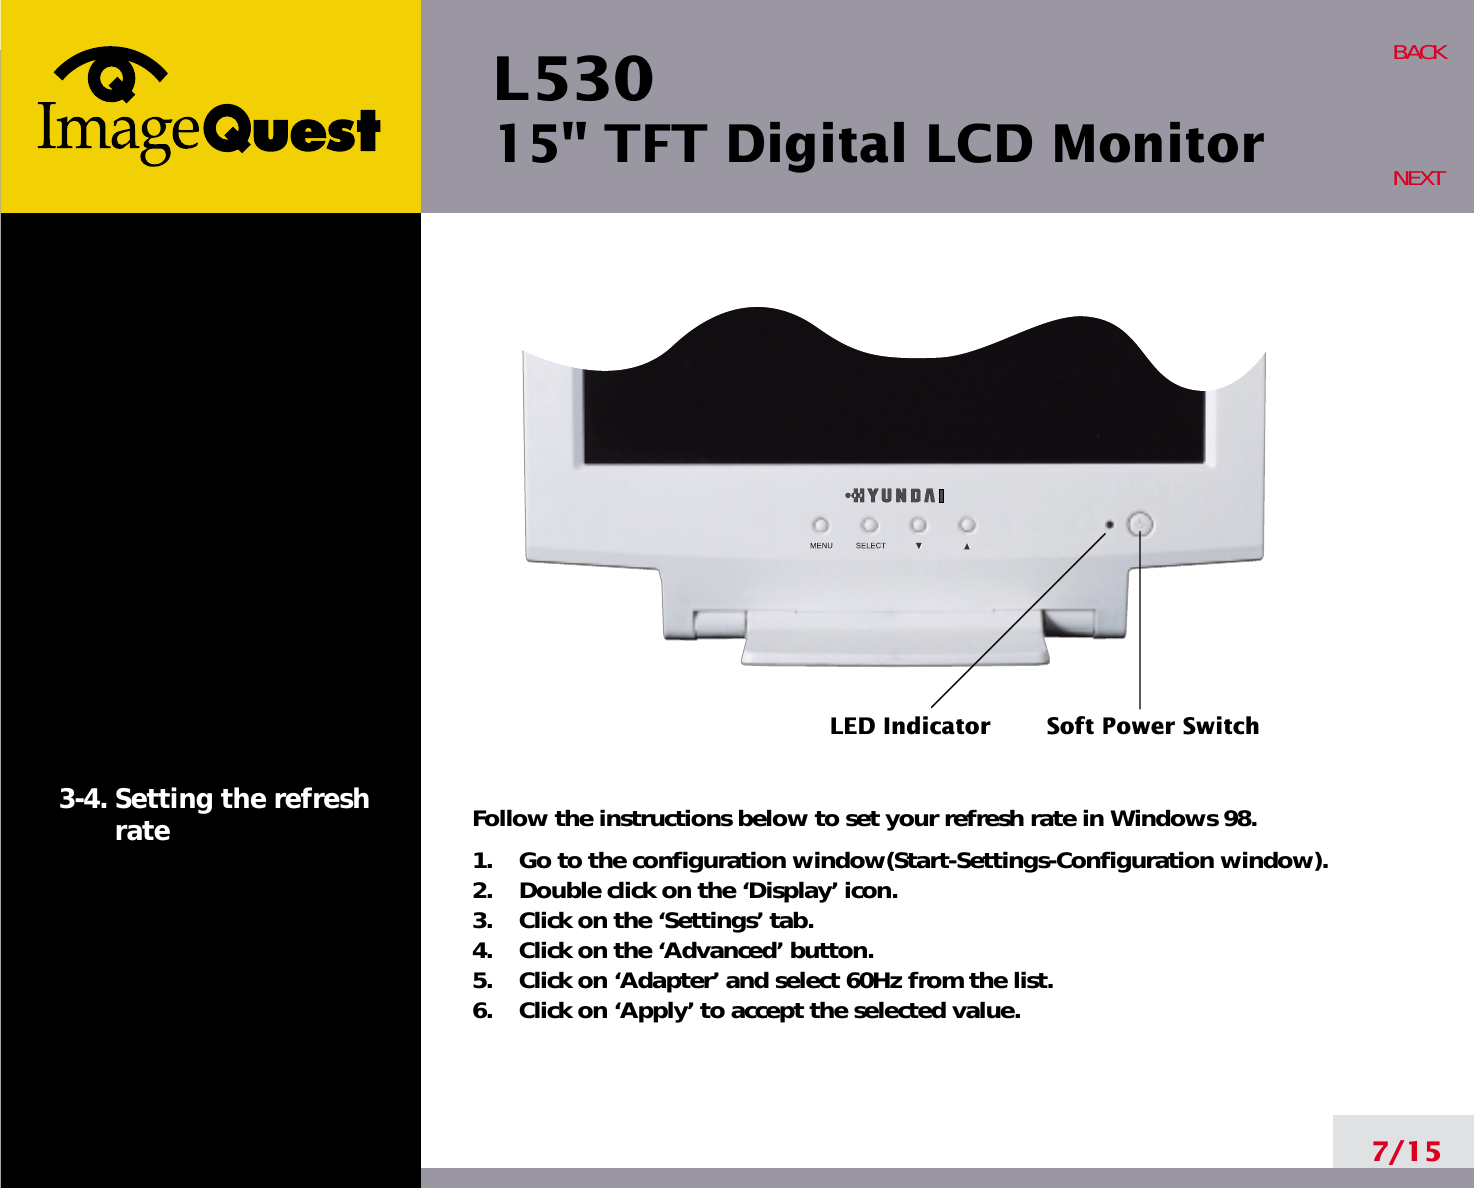 L53015&quot; TFT Digital LCD Monitor7/15BACKNEXT3-4. Setting the refreshrate Follow the instructions below to set your refresh rate in Windows 98.1.    Go to the configuration window(Start-Settings-Configuration window).2.    Double click on the ‘Display’ icon.3.    Click on the ‘Settings’ tab.4.    Click on the ‘Advanced’ button.5.    Click on ‘Adapter’ and select 60Hz from the list.6.    Click on ‘Apply’ to accept the selected value.LED Indicator Soft Power Switch